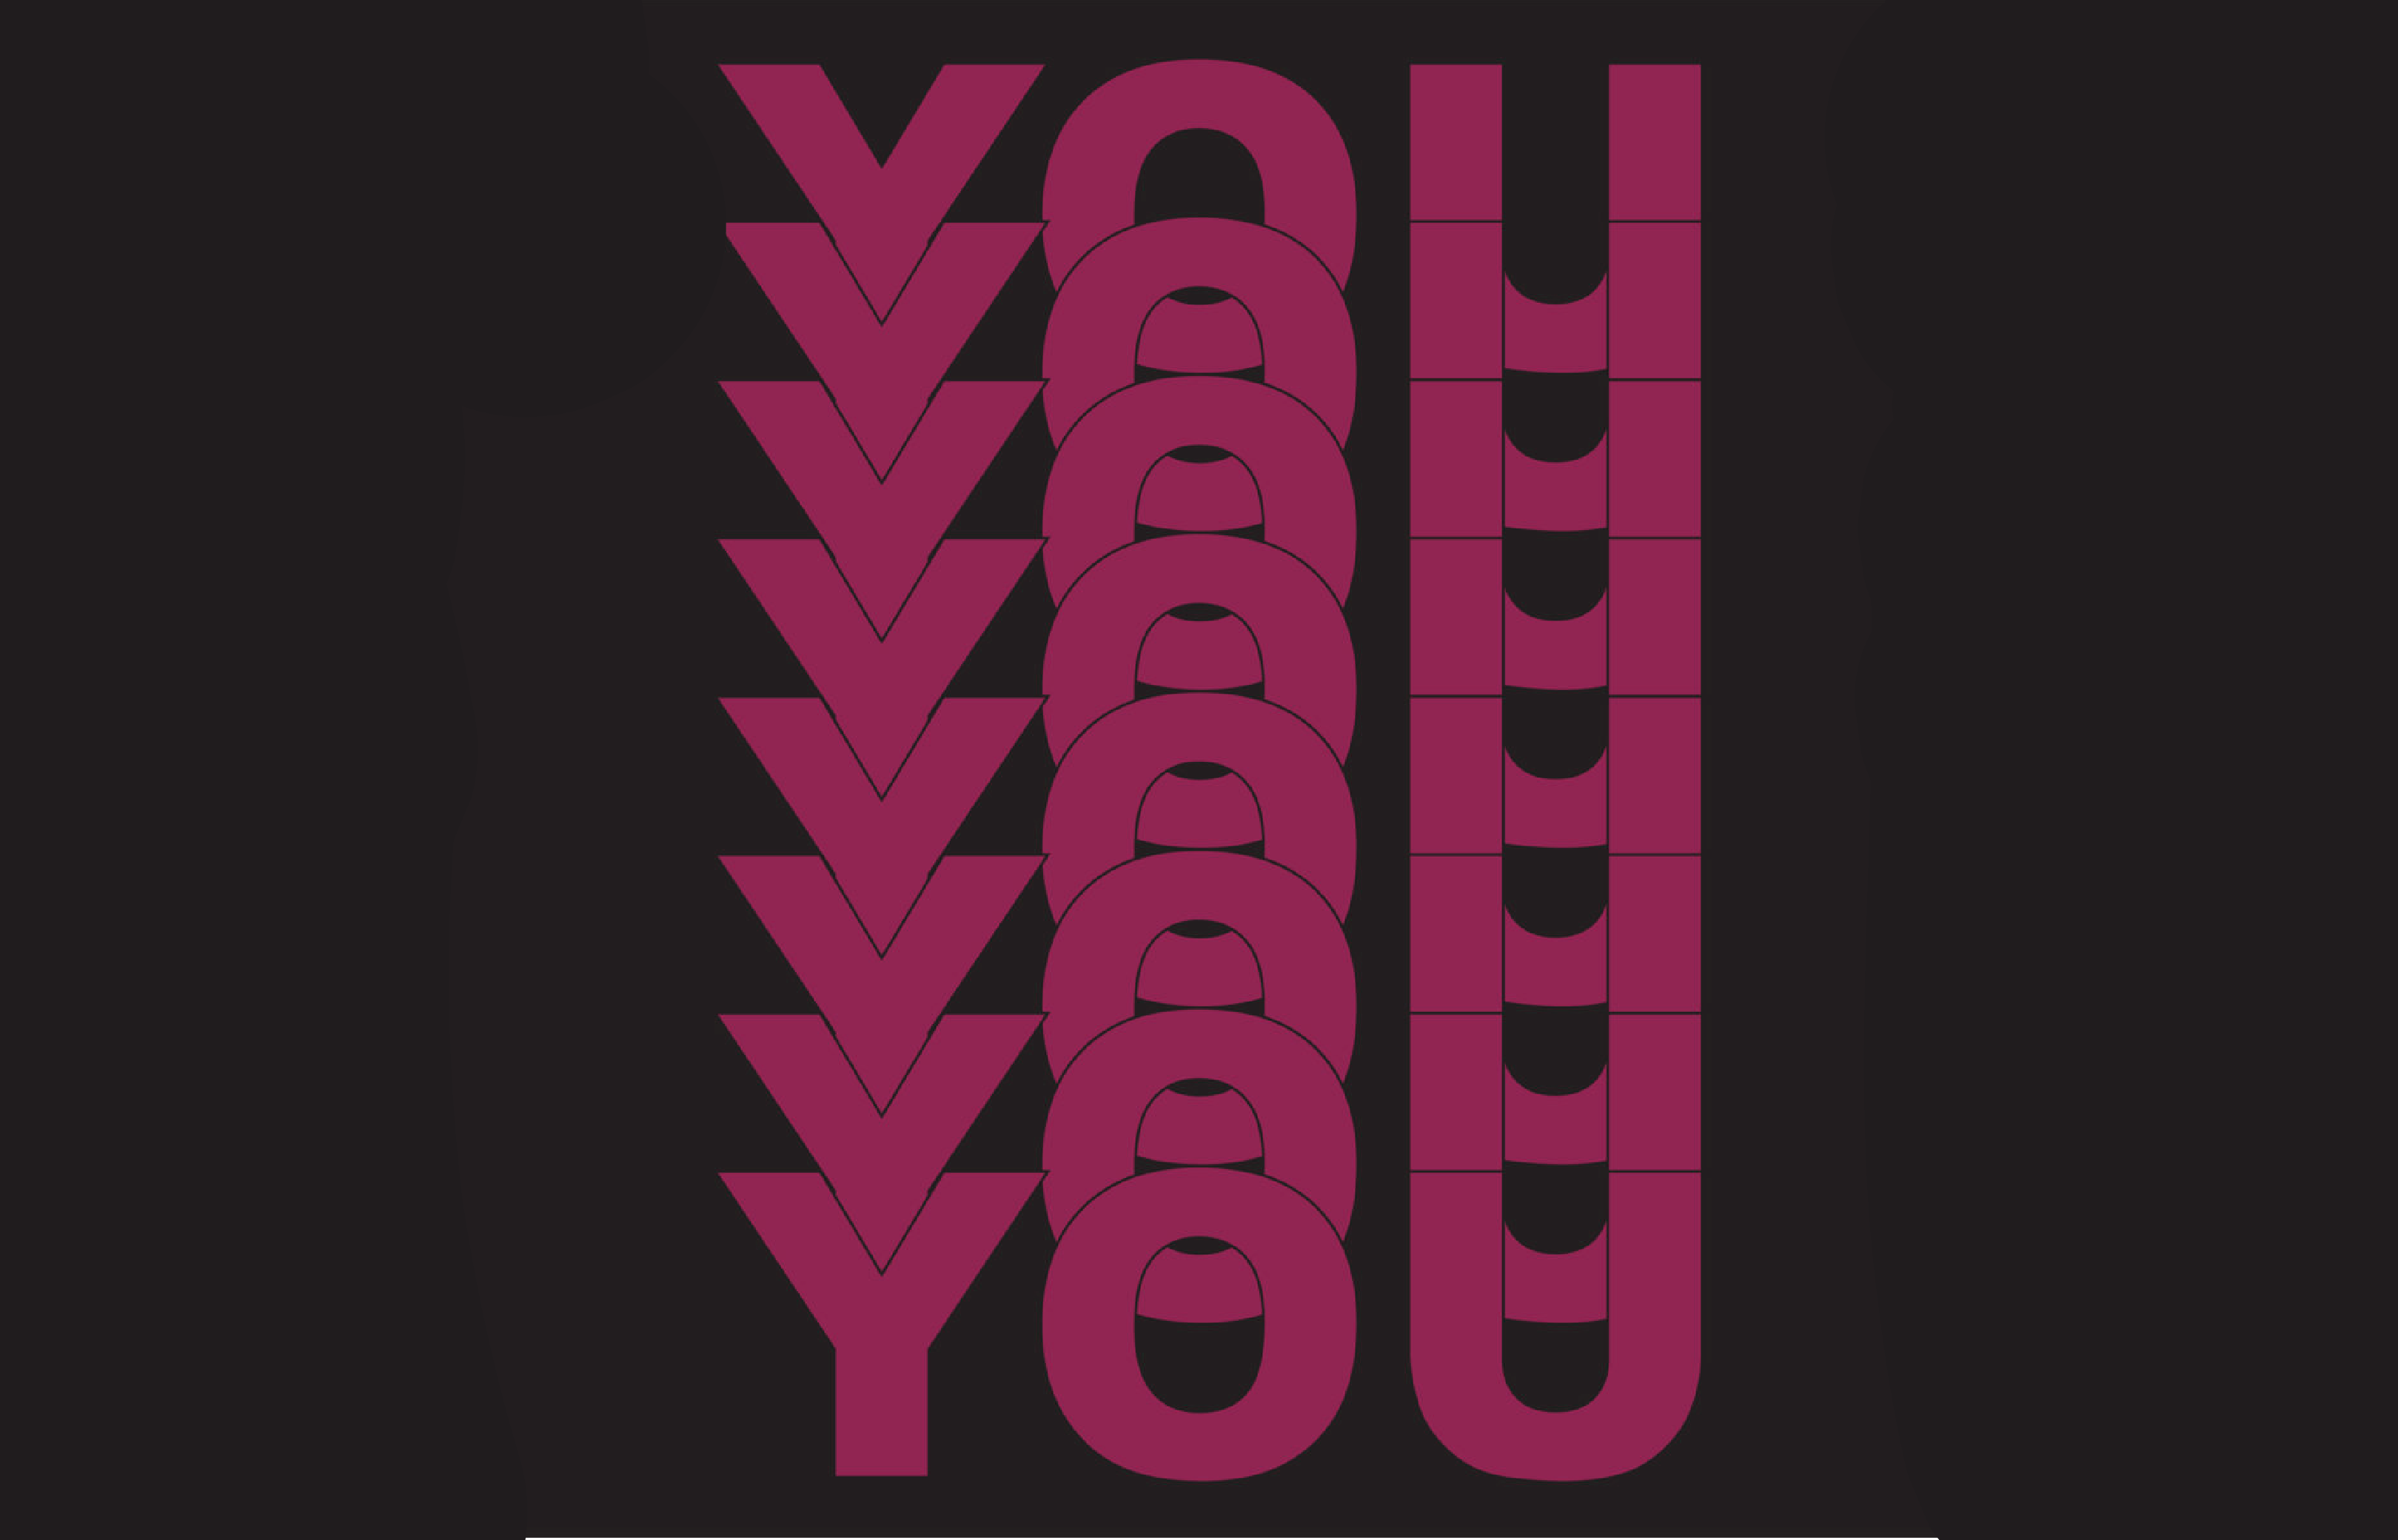 Egypt’s SHIHA Ends Musical Hiatus With New House Tune ‘You’